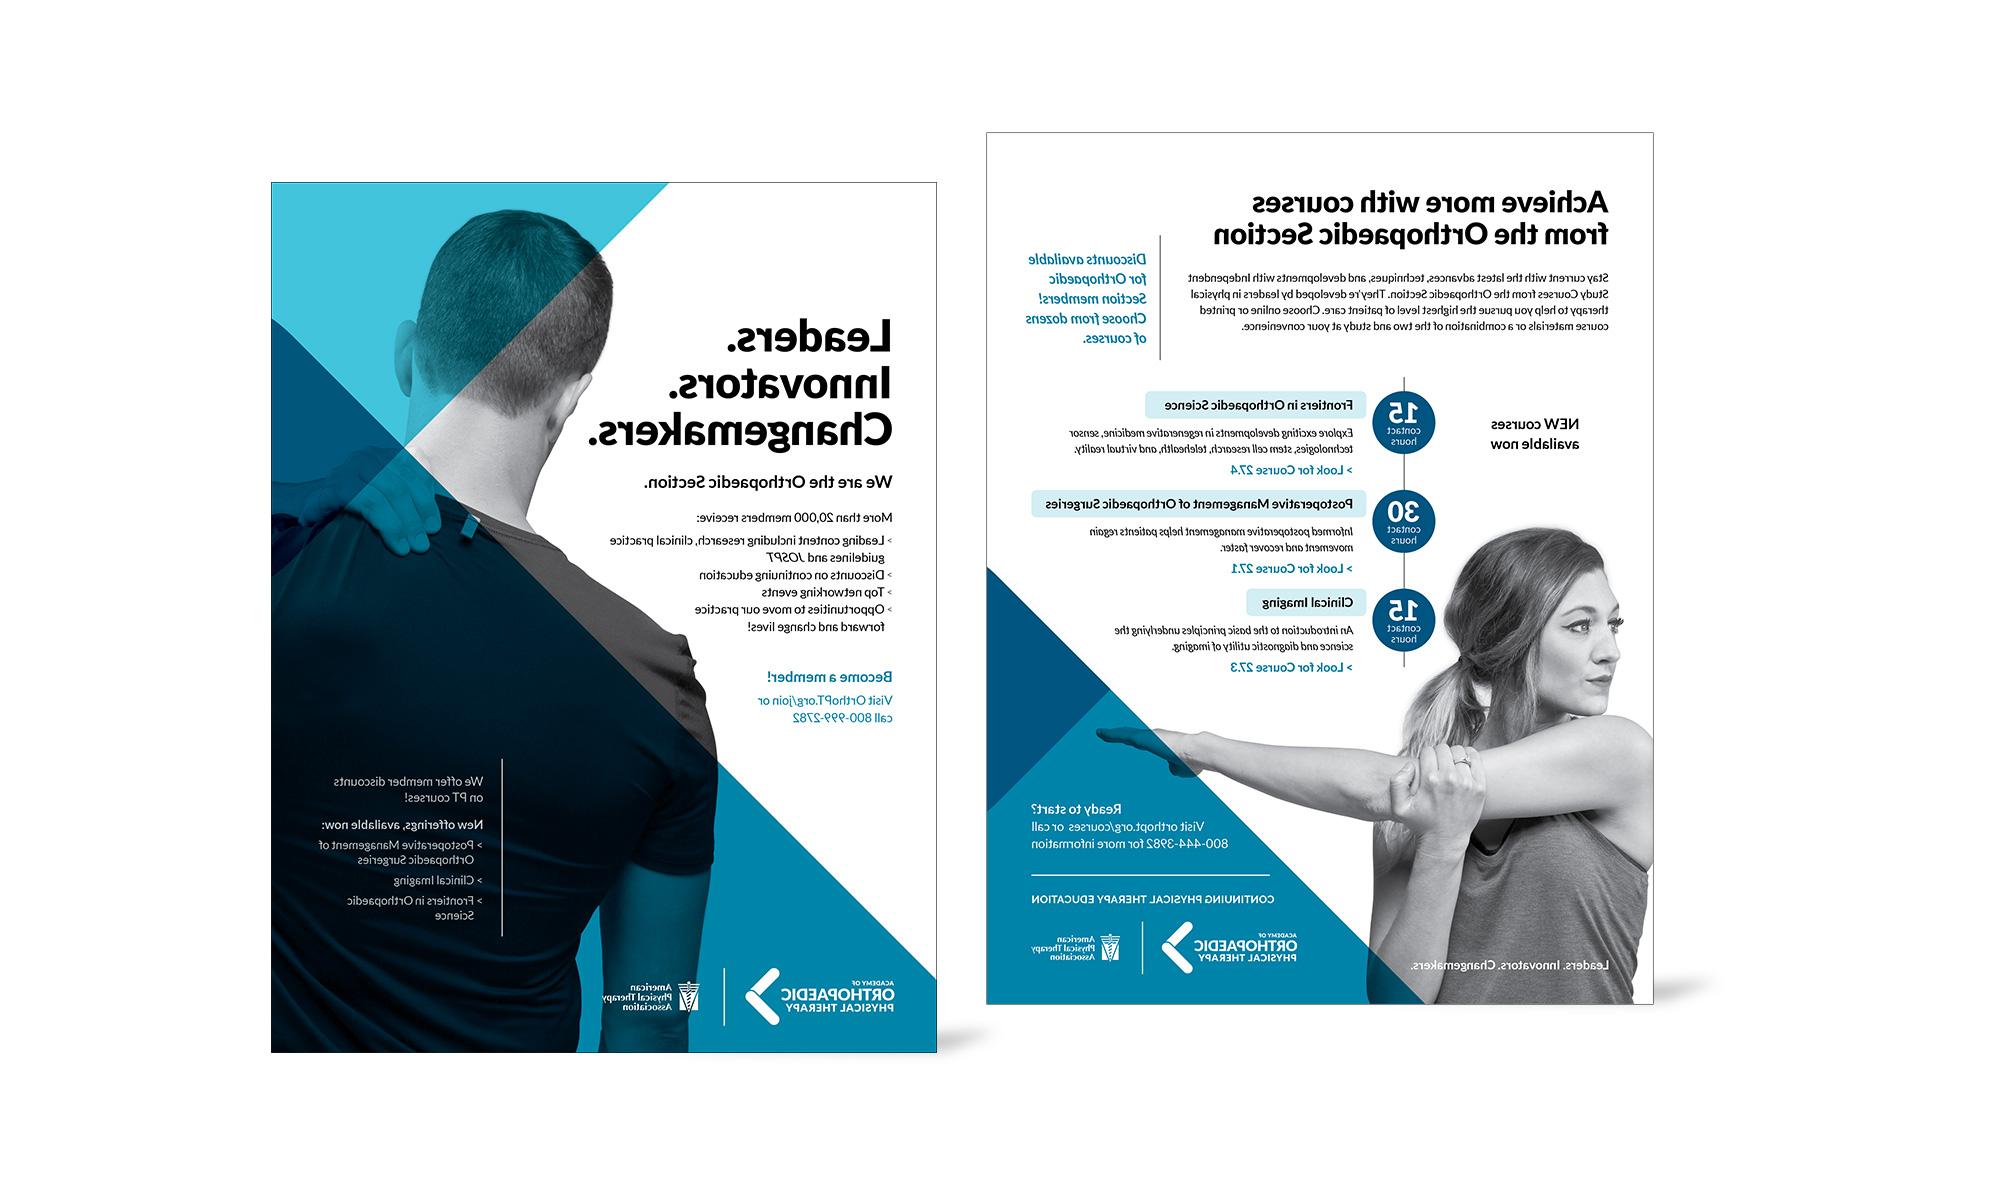 Academy of Orthopaedic Physical Therapy print ads by Vendi. Left ad details new CE courses, right shares membership benefits.